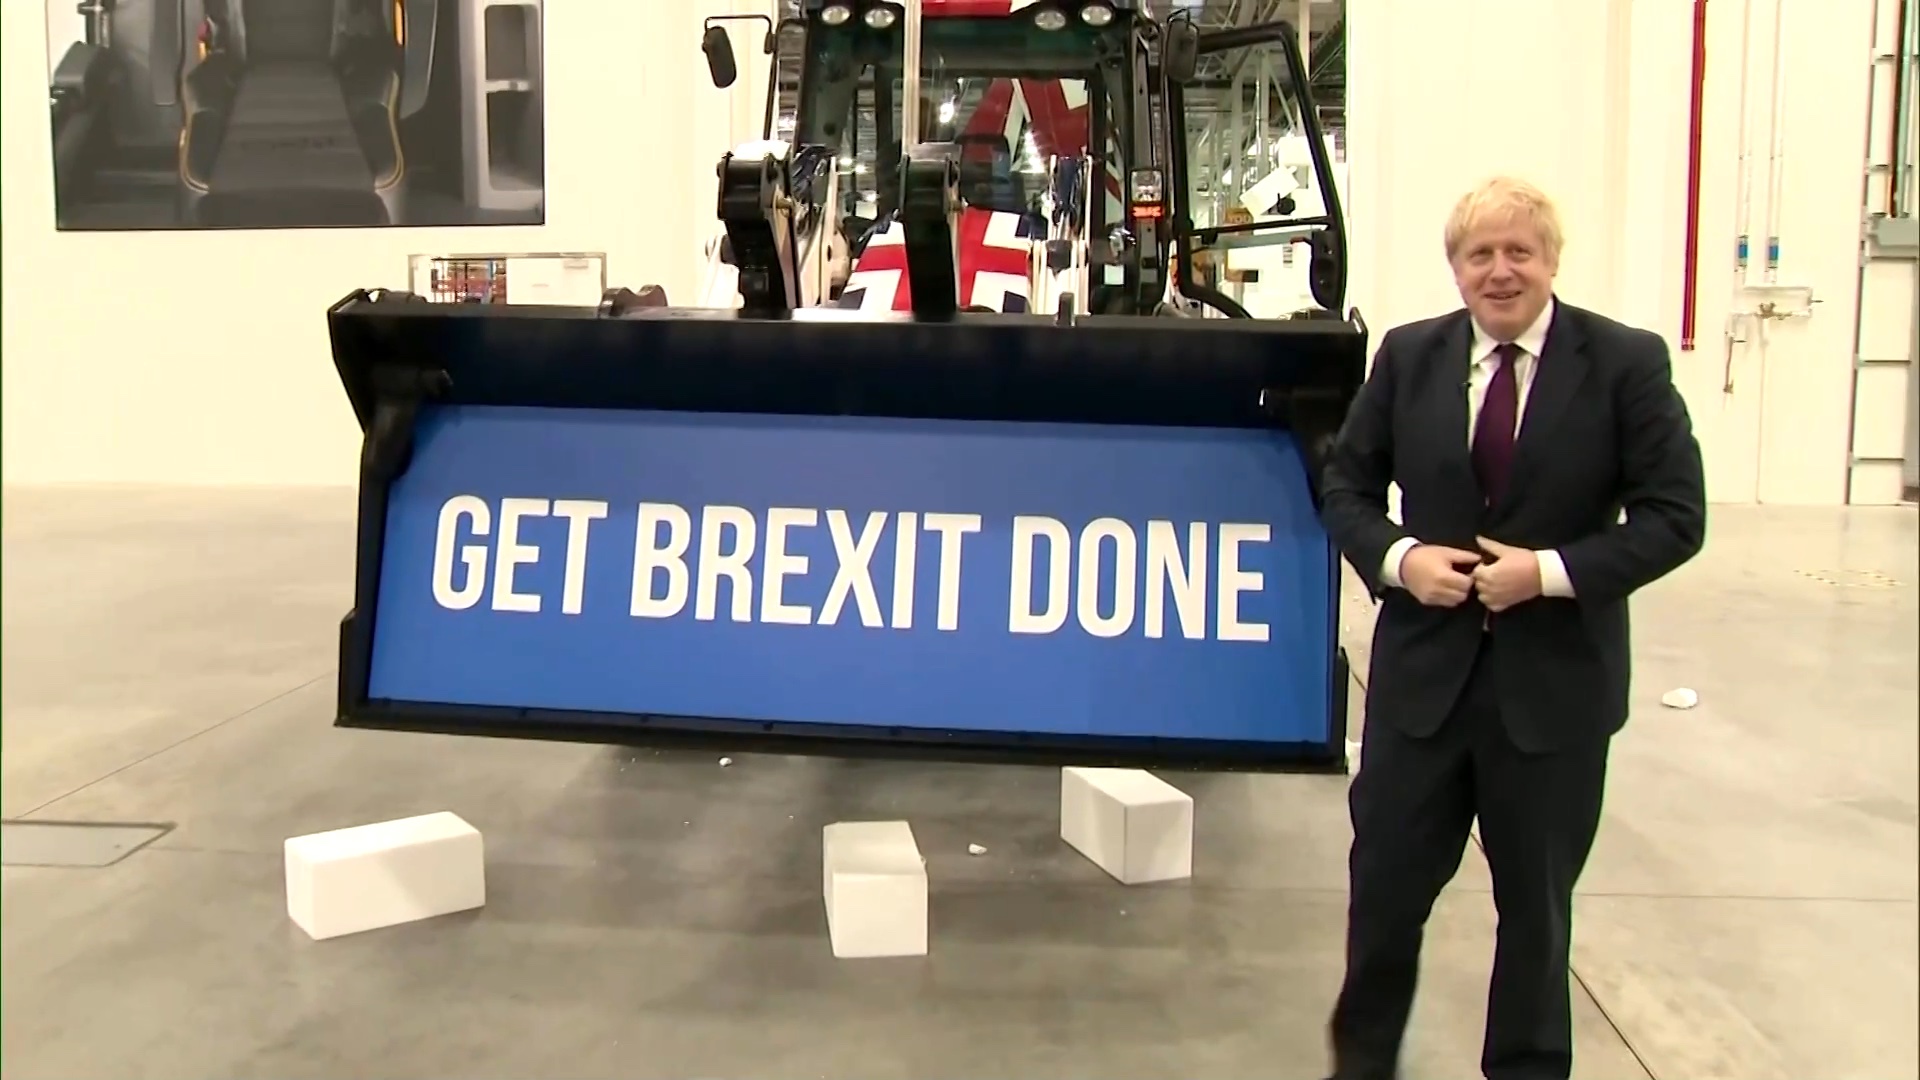 Boris Johnson drove a bulldozer through a polystyrene wall as an election gimmick, but the real Brexit has proven as tougher obstacle. /Reuters